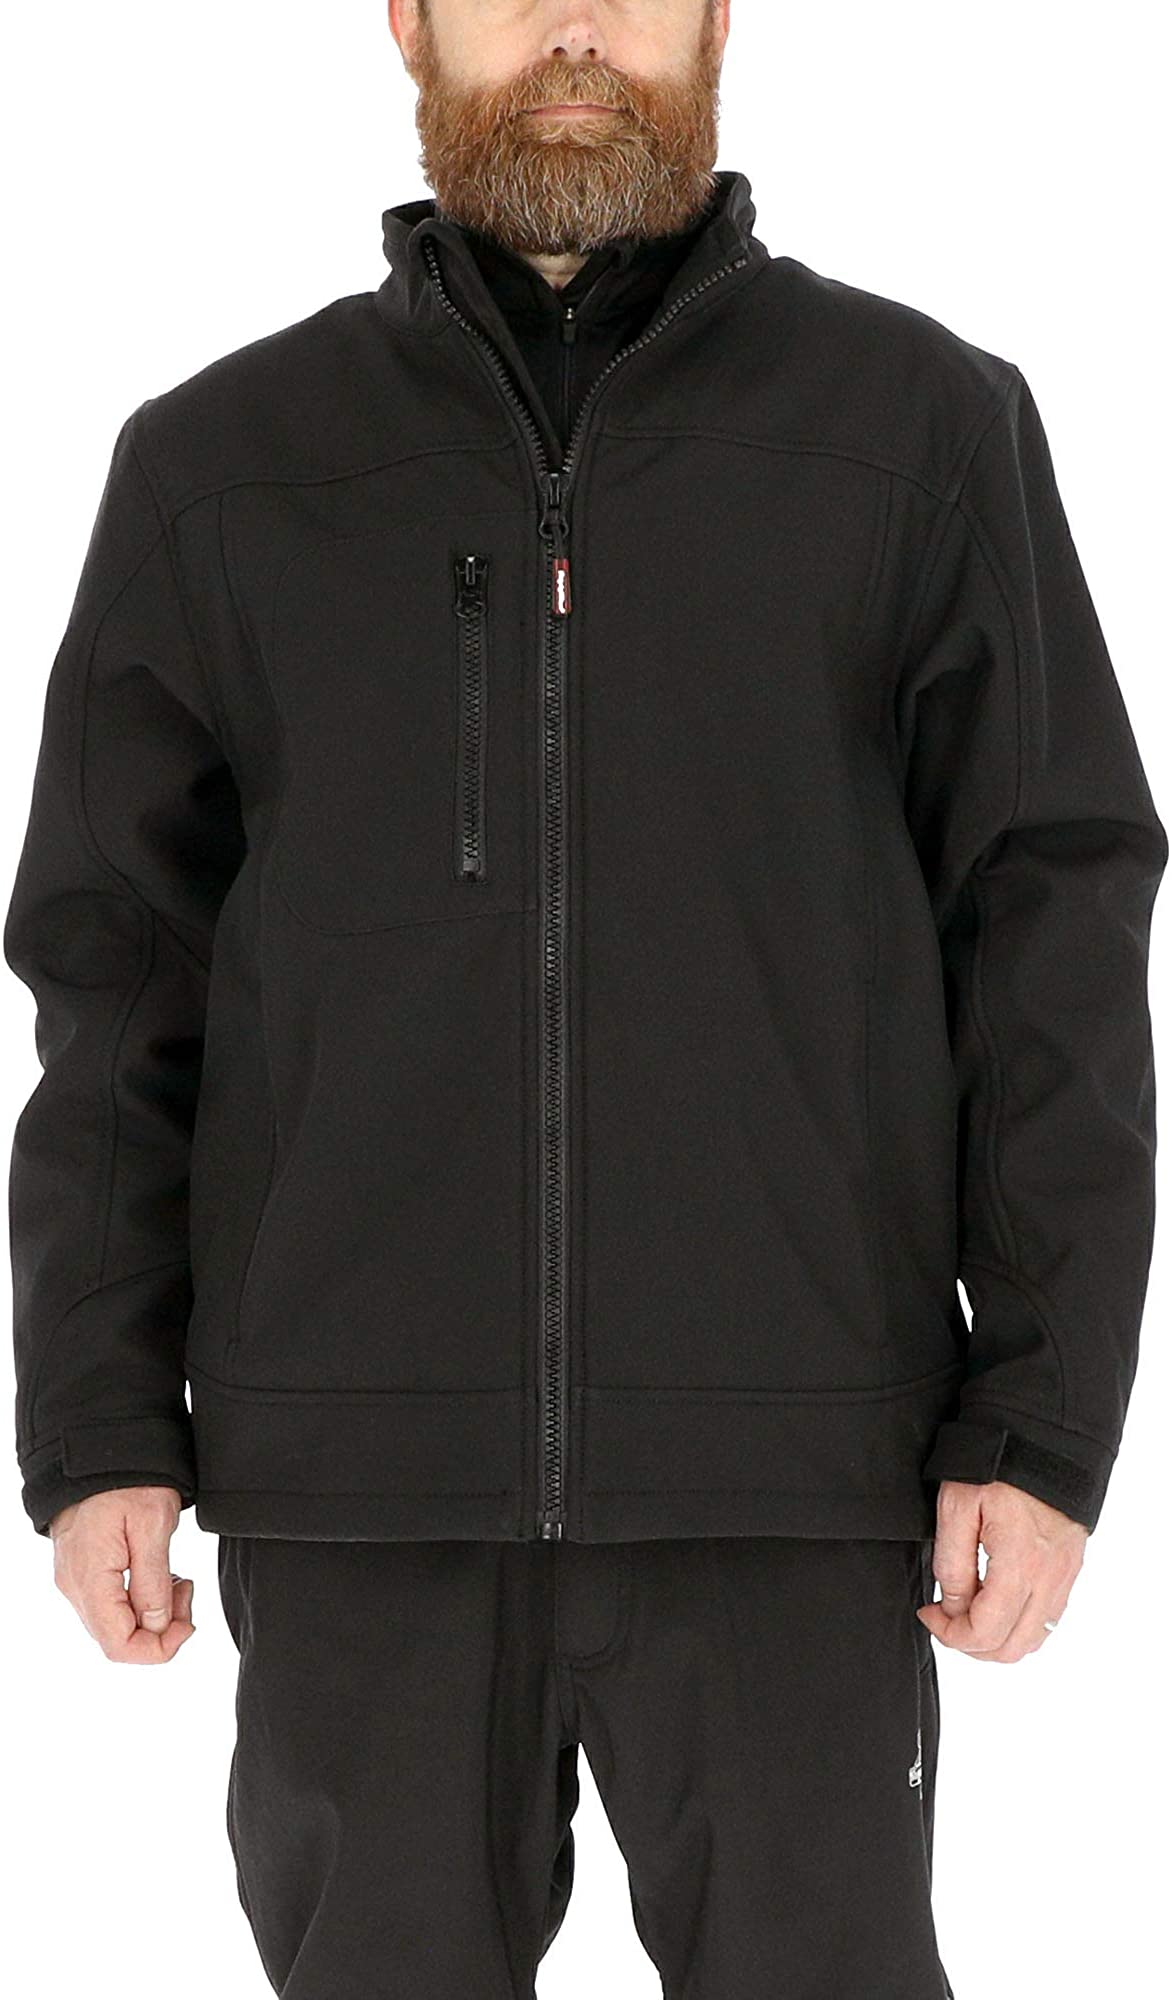 RefrigiWear Water-Resistant Insulated Softshell Jacket with Soft Micro-Fleece Lining